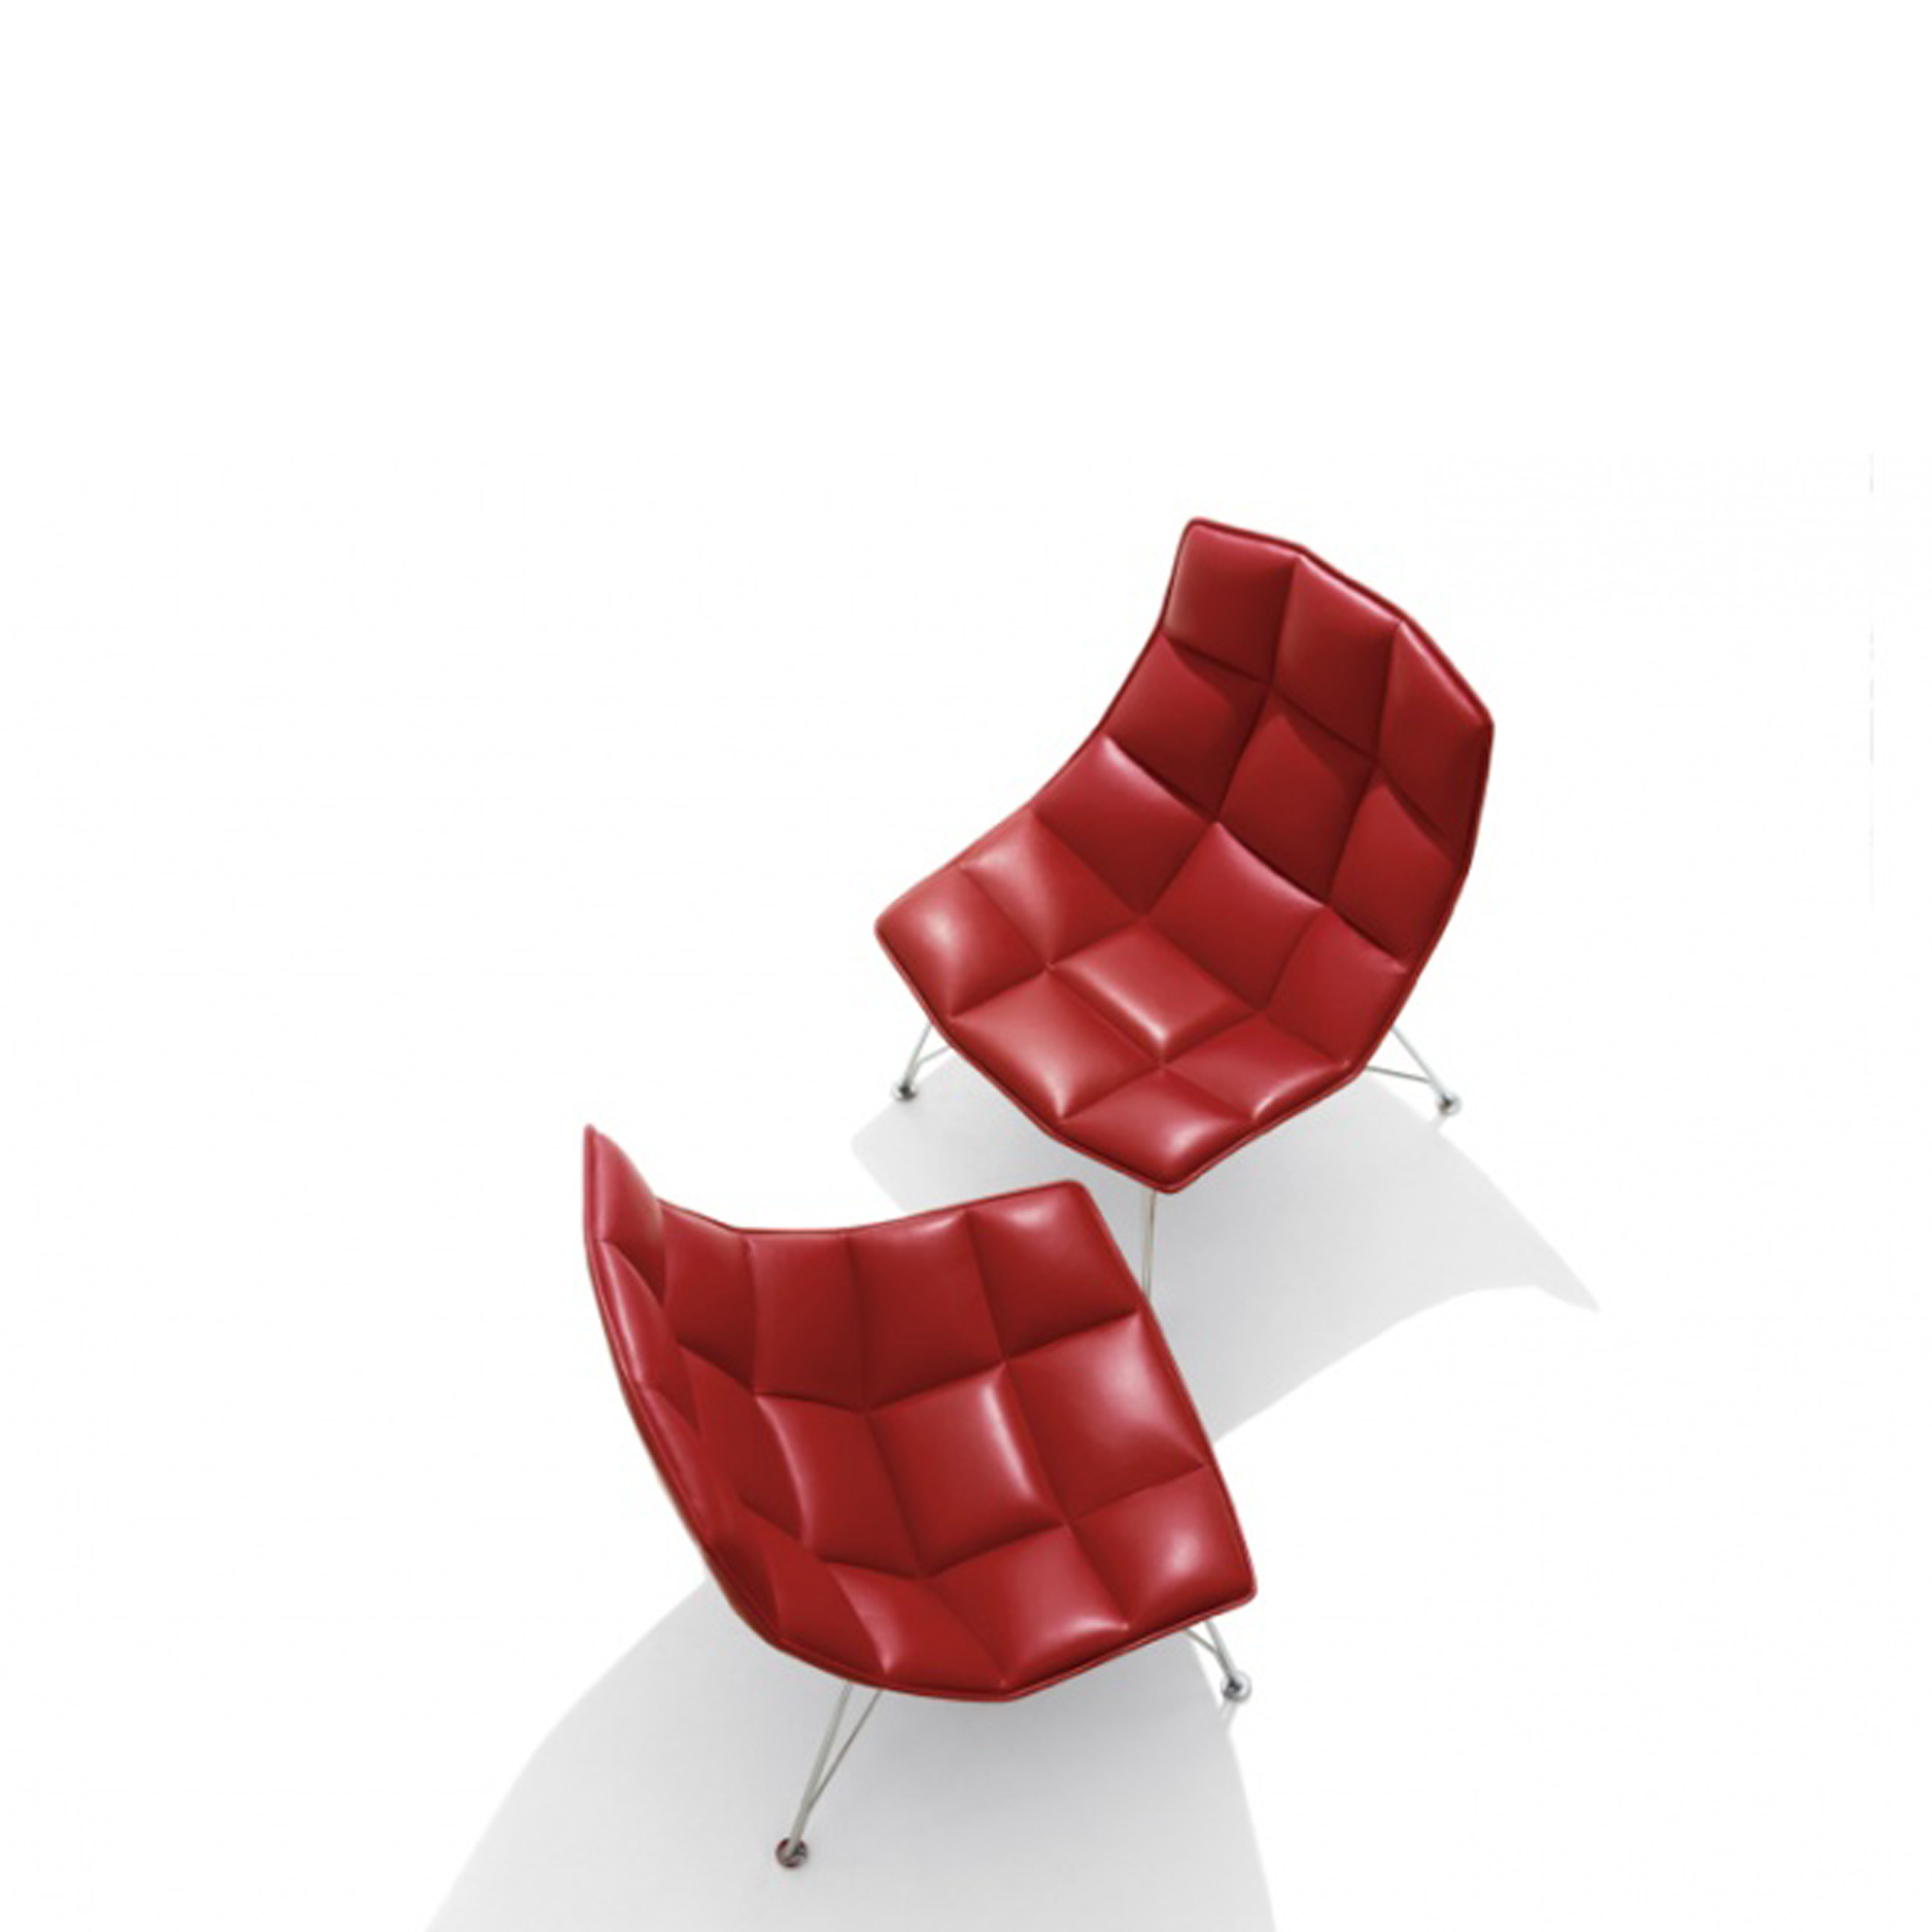 jehs+laub collection for knoll.